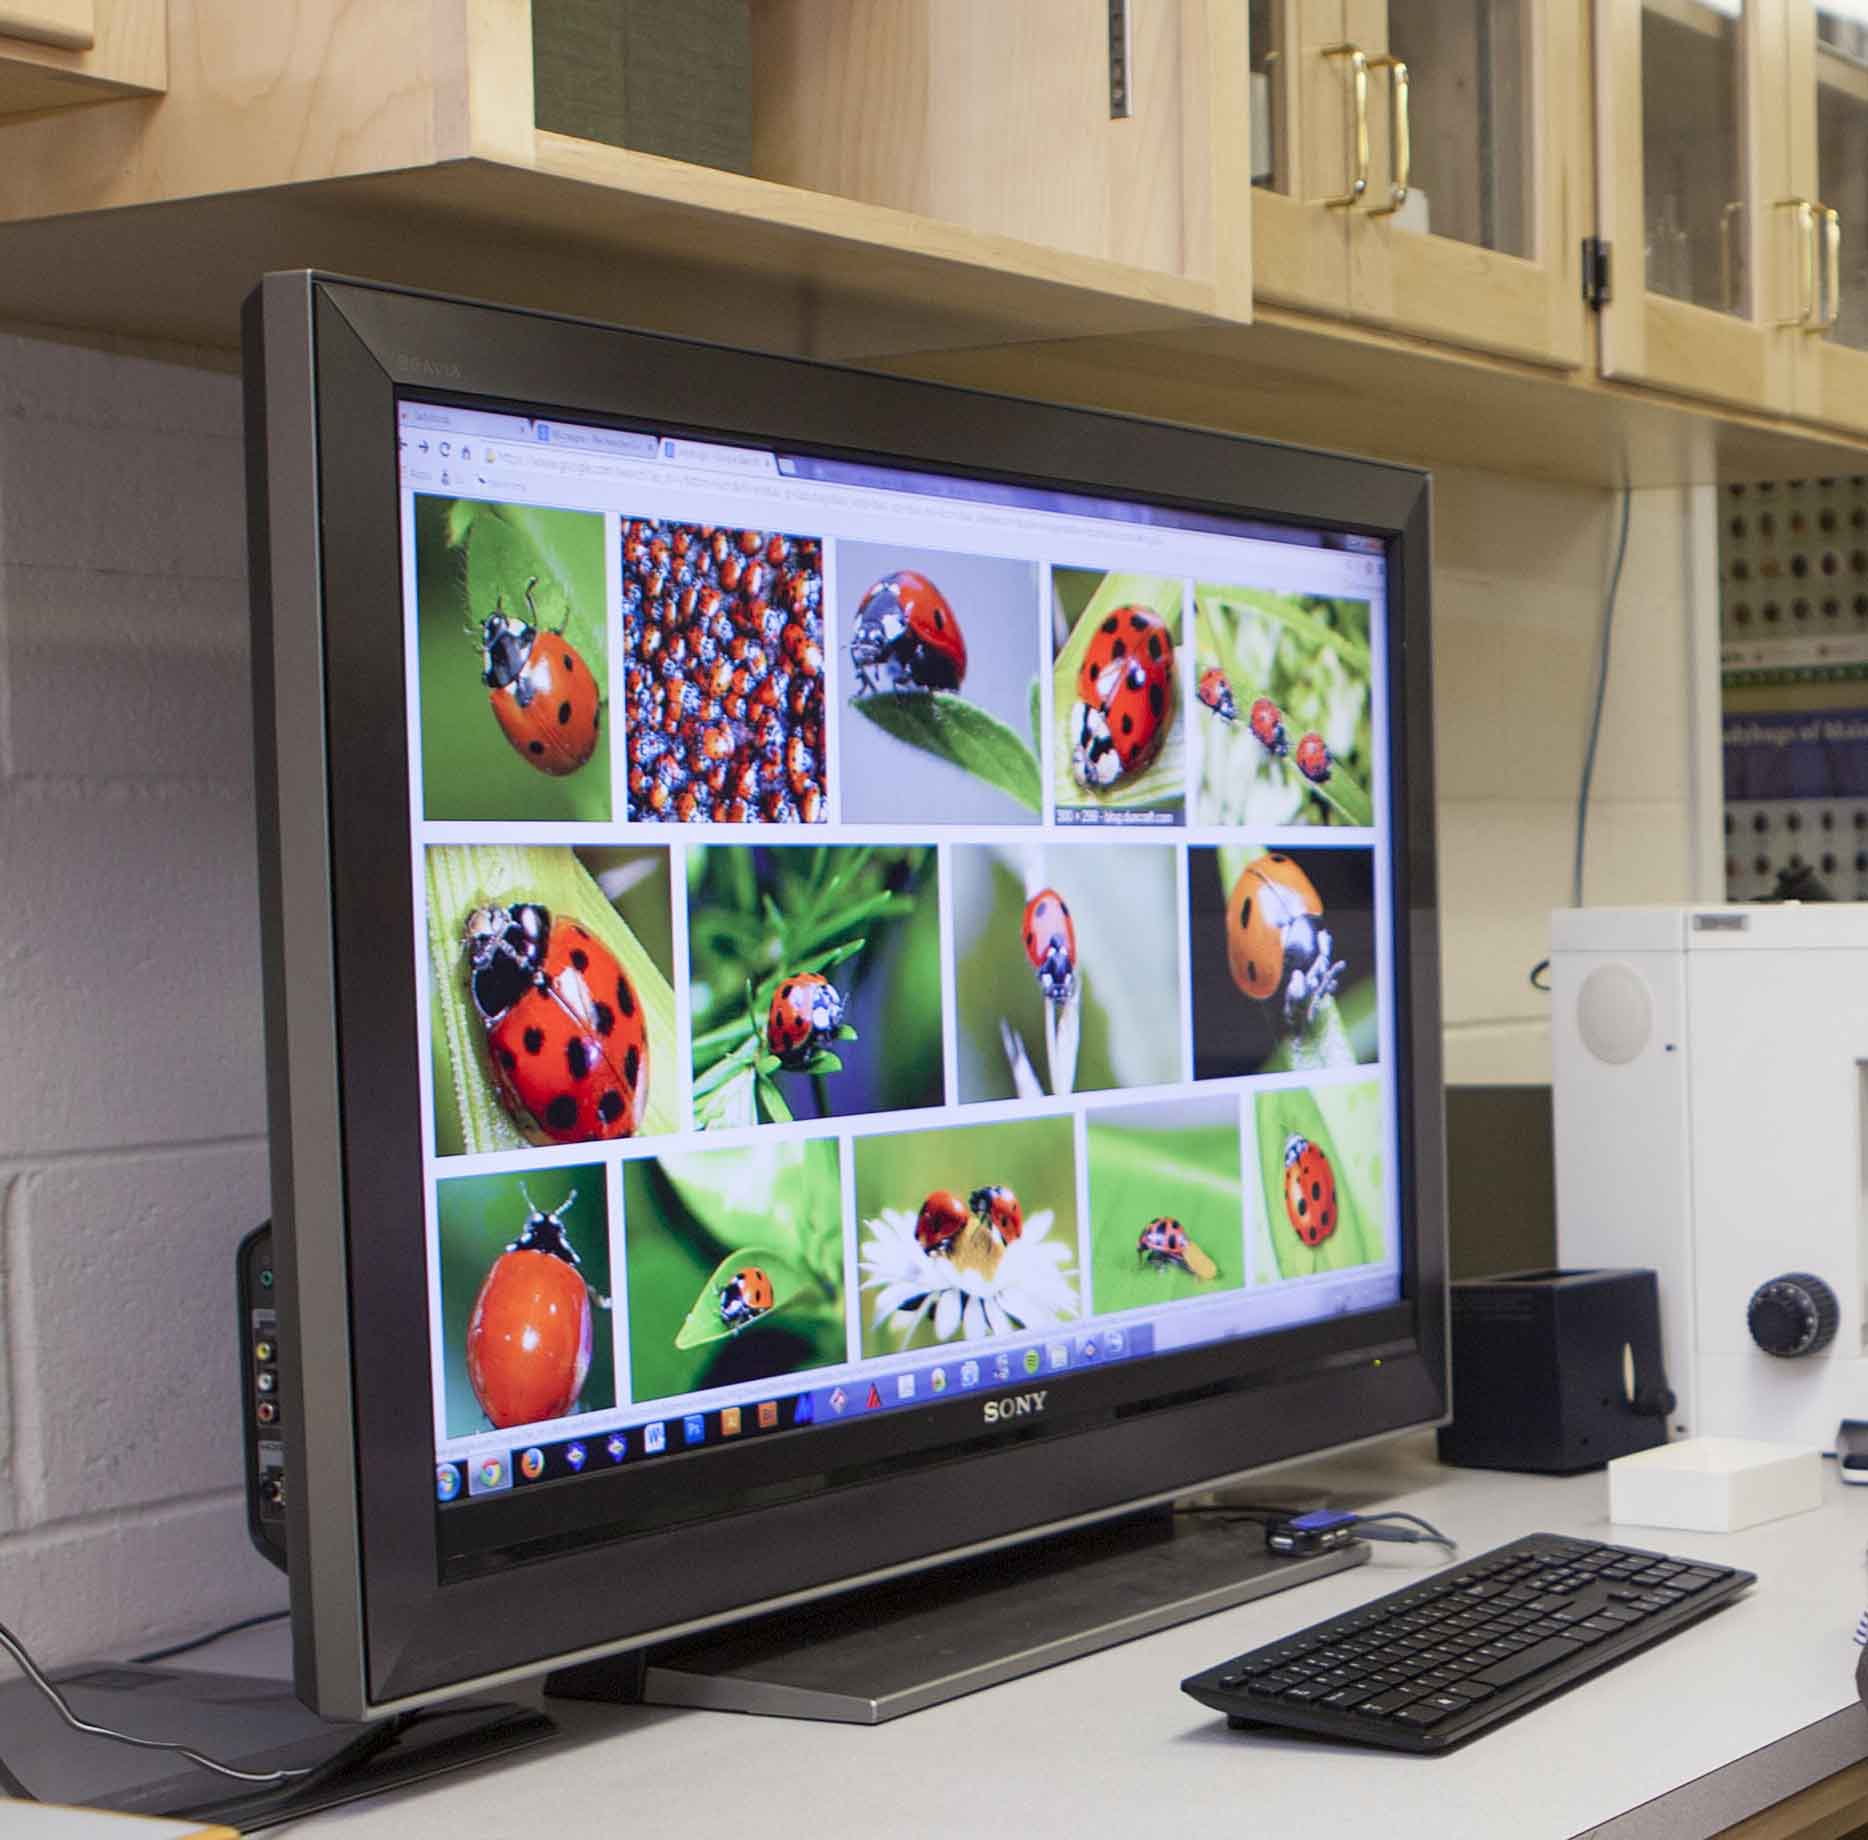 Brad K Hounkpati is shown in his UGA office with images of his lady bug collection shown on his computer screen.